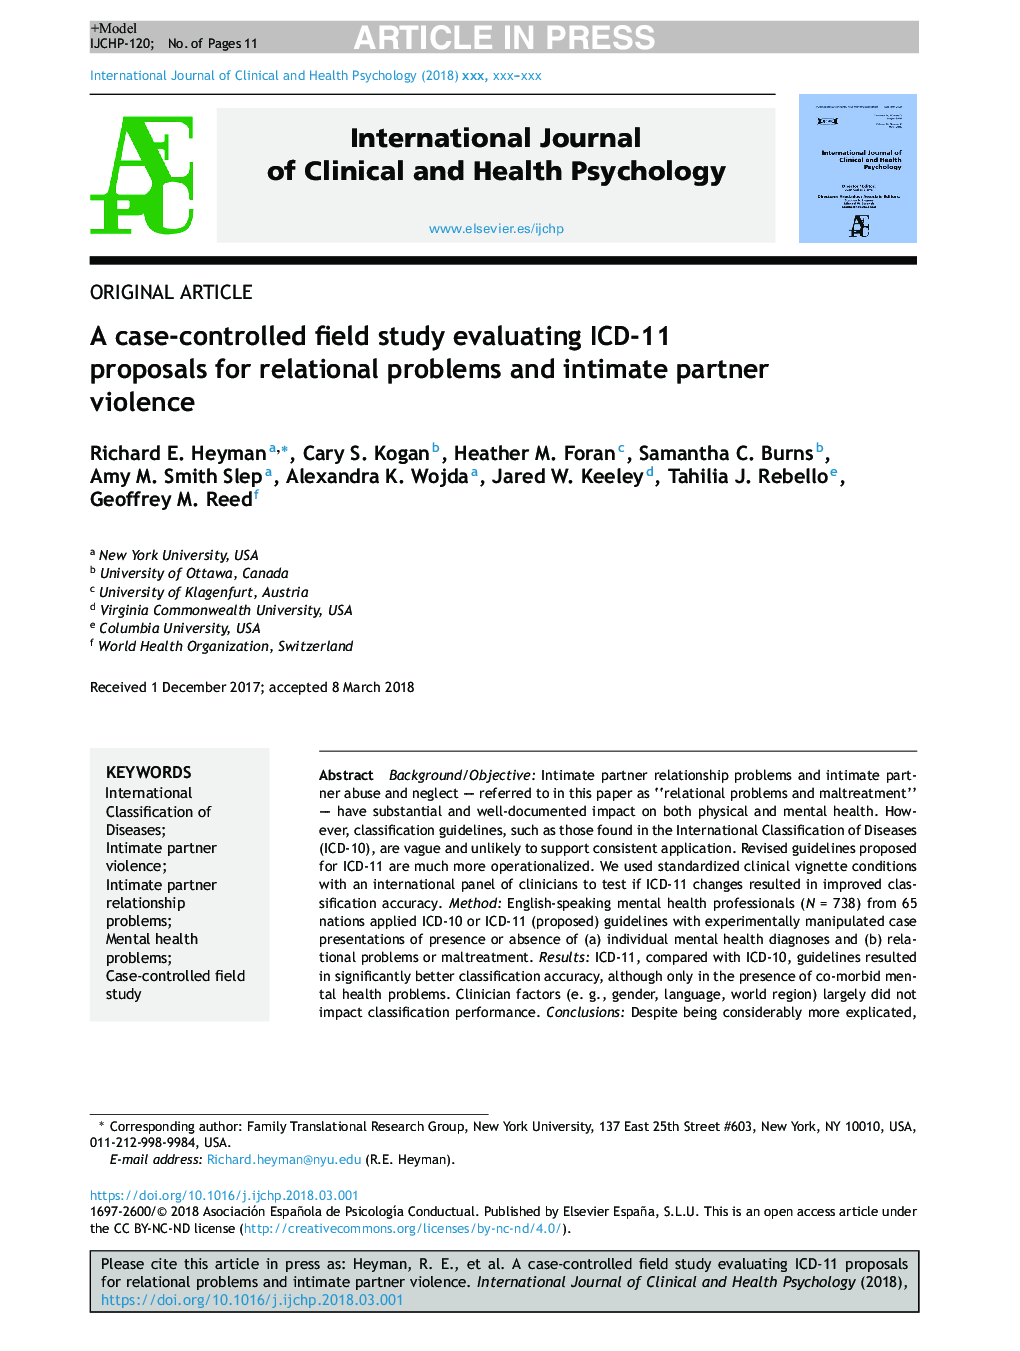 A case-controlled field study evaluating ICD-11 proposals for relational problems and intimate partner violence